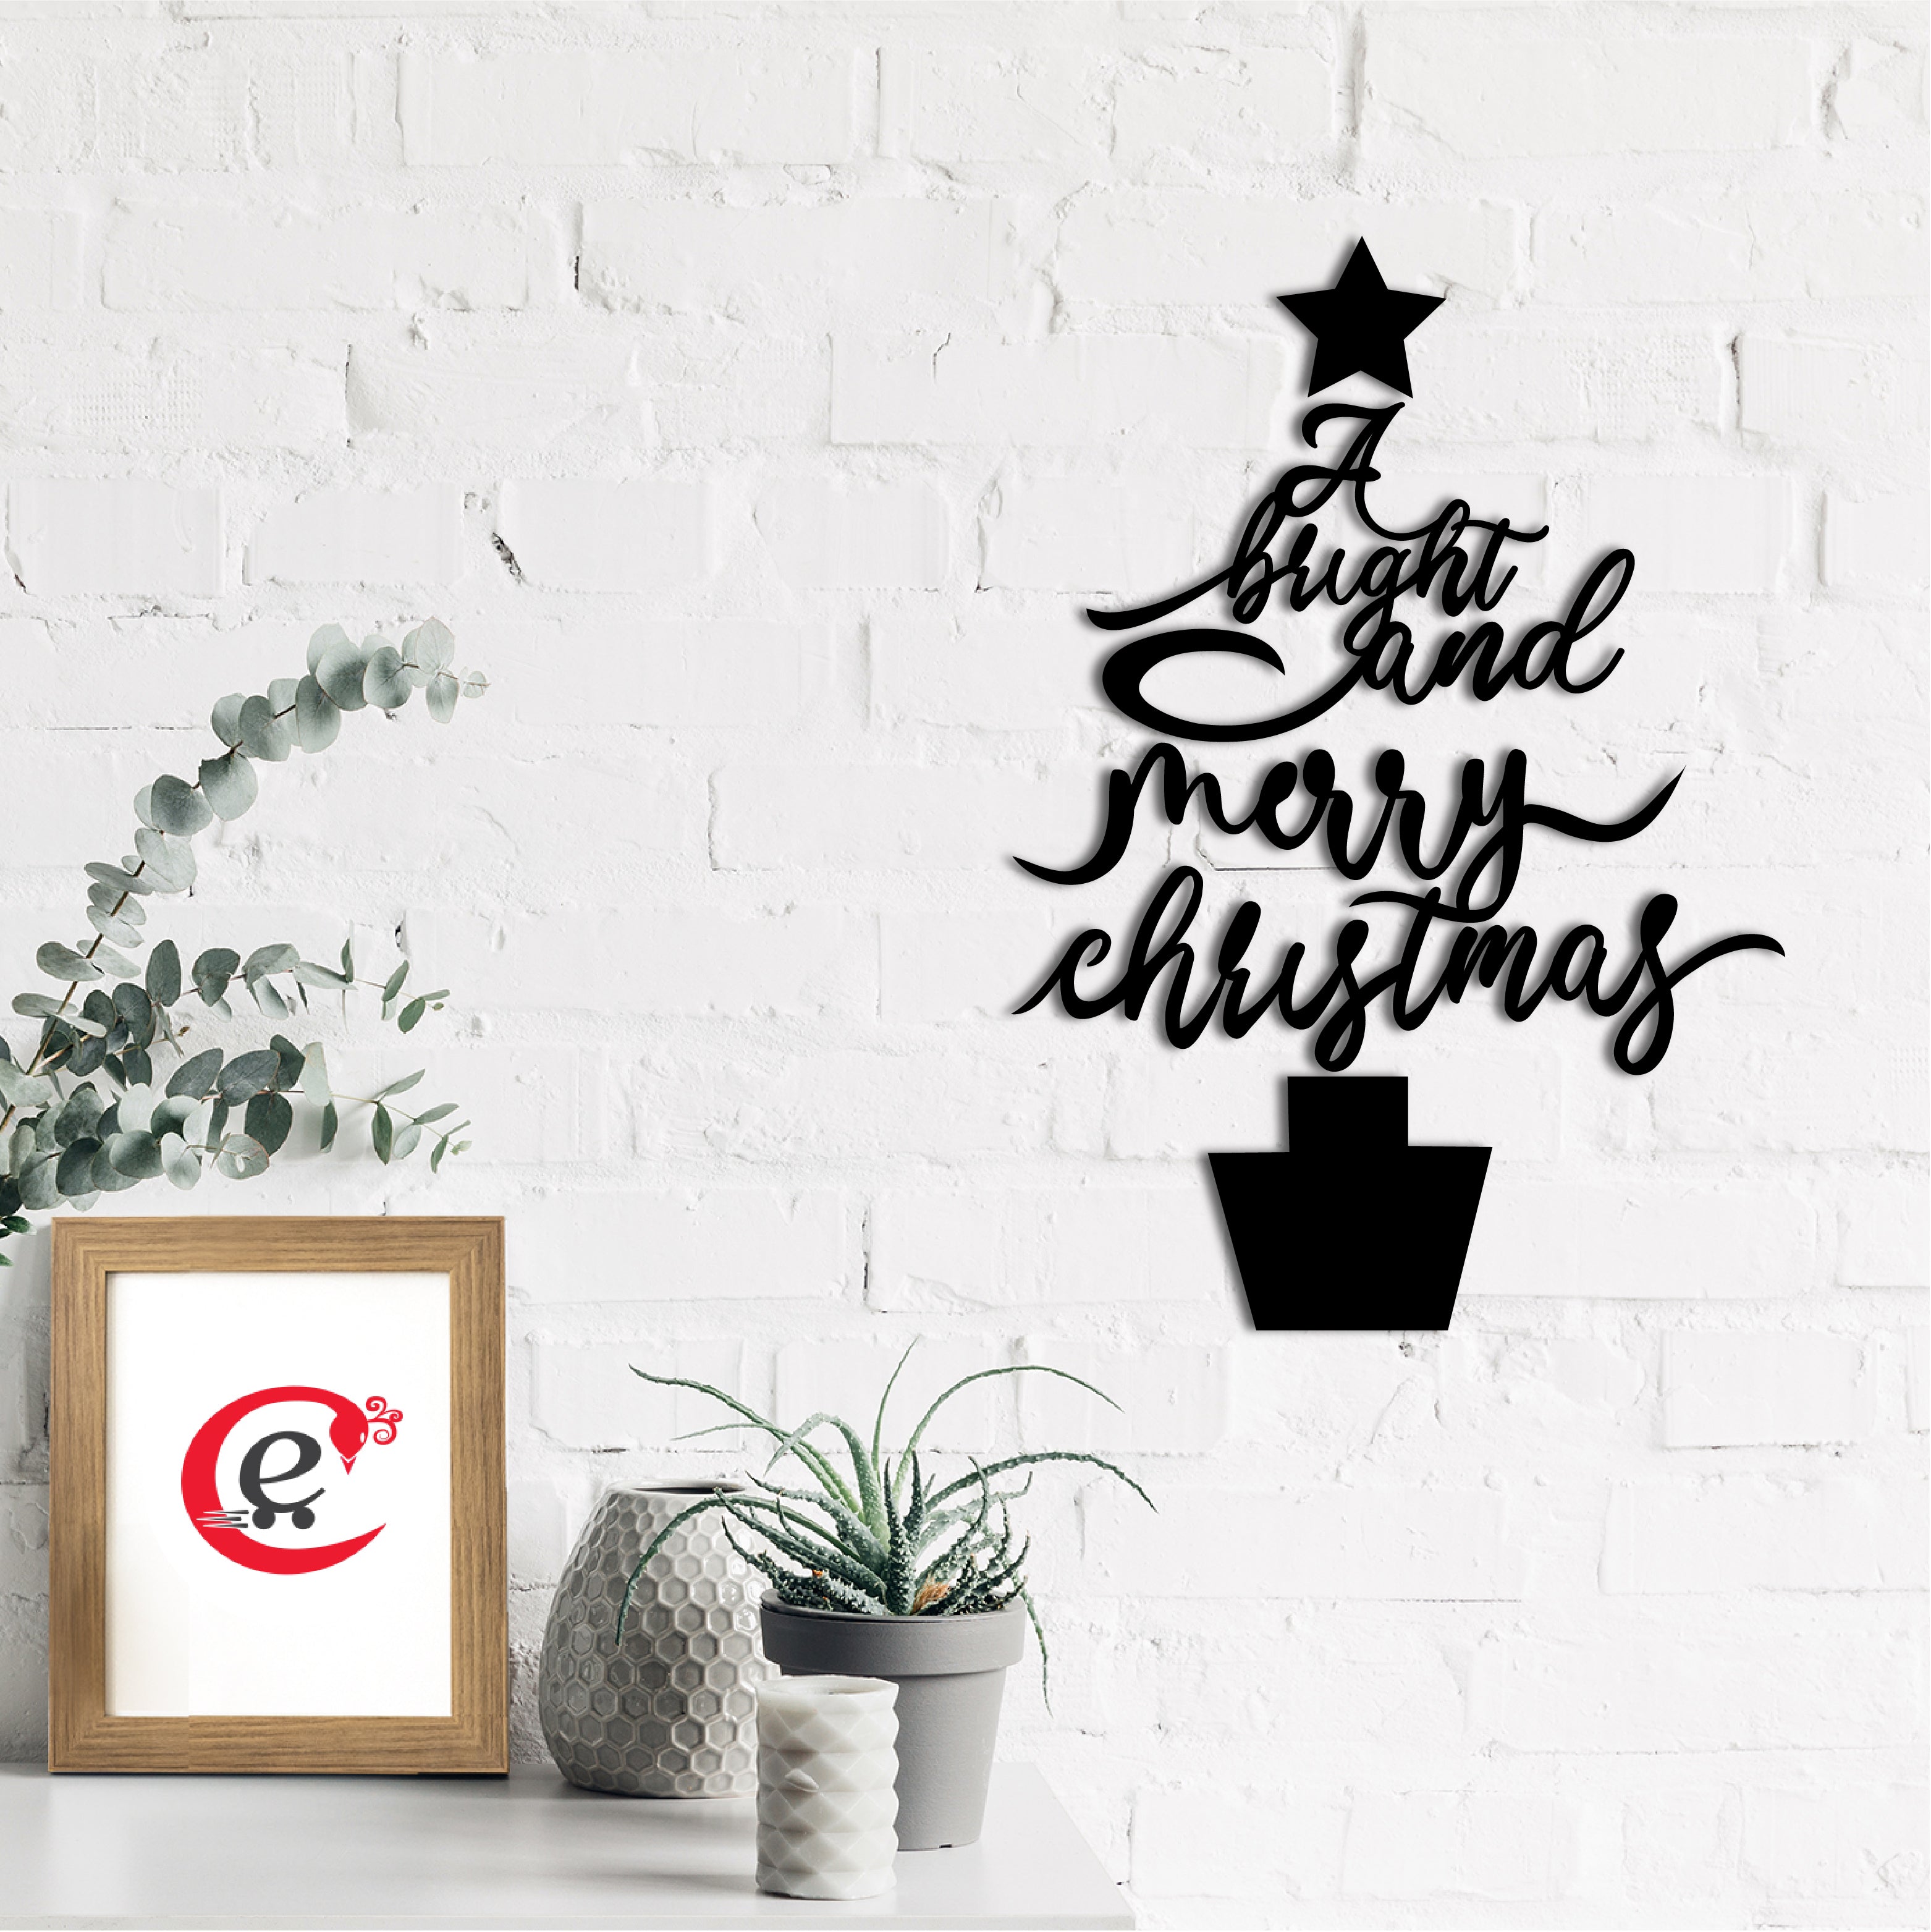 "A Bright and Merry Christmas" Black Engineered Wood Wall Art Cutout, Ready to Hang Home Decor